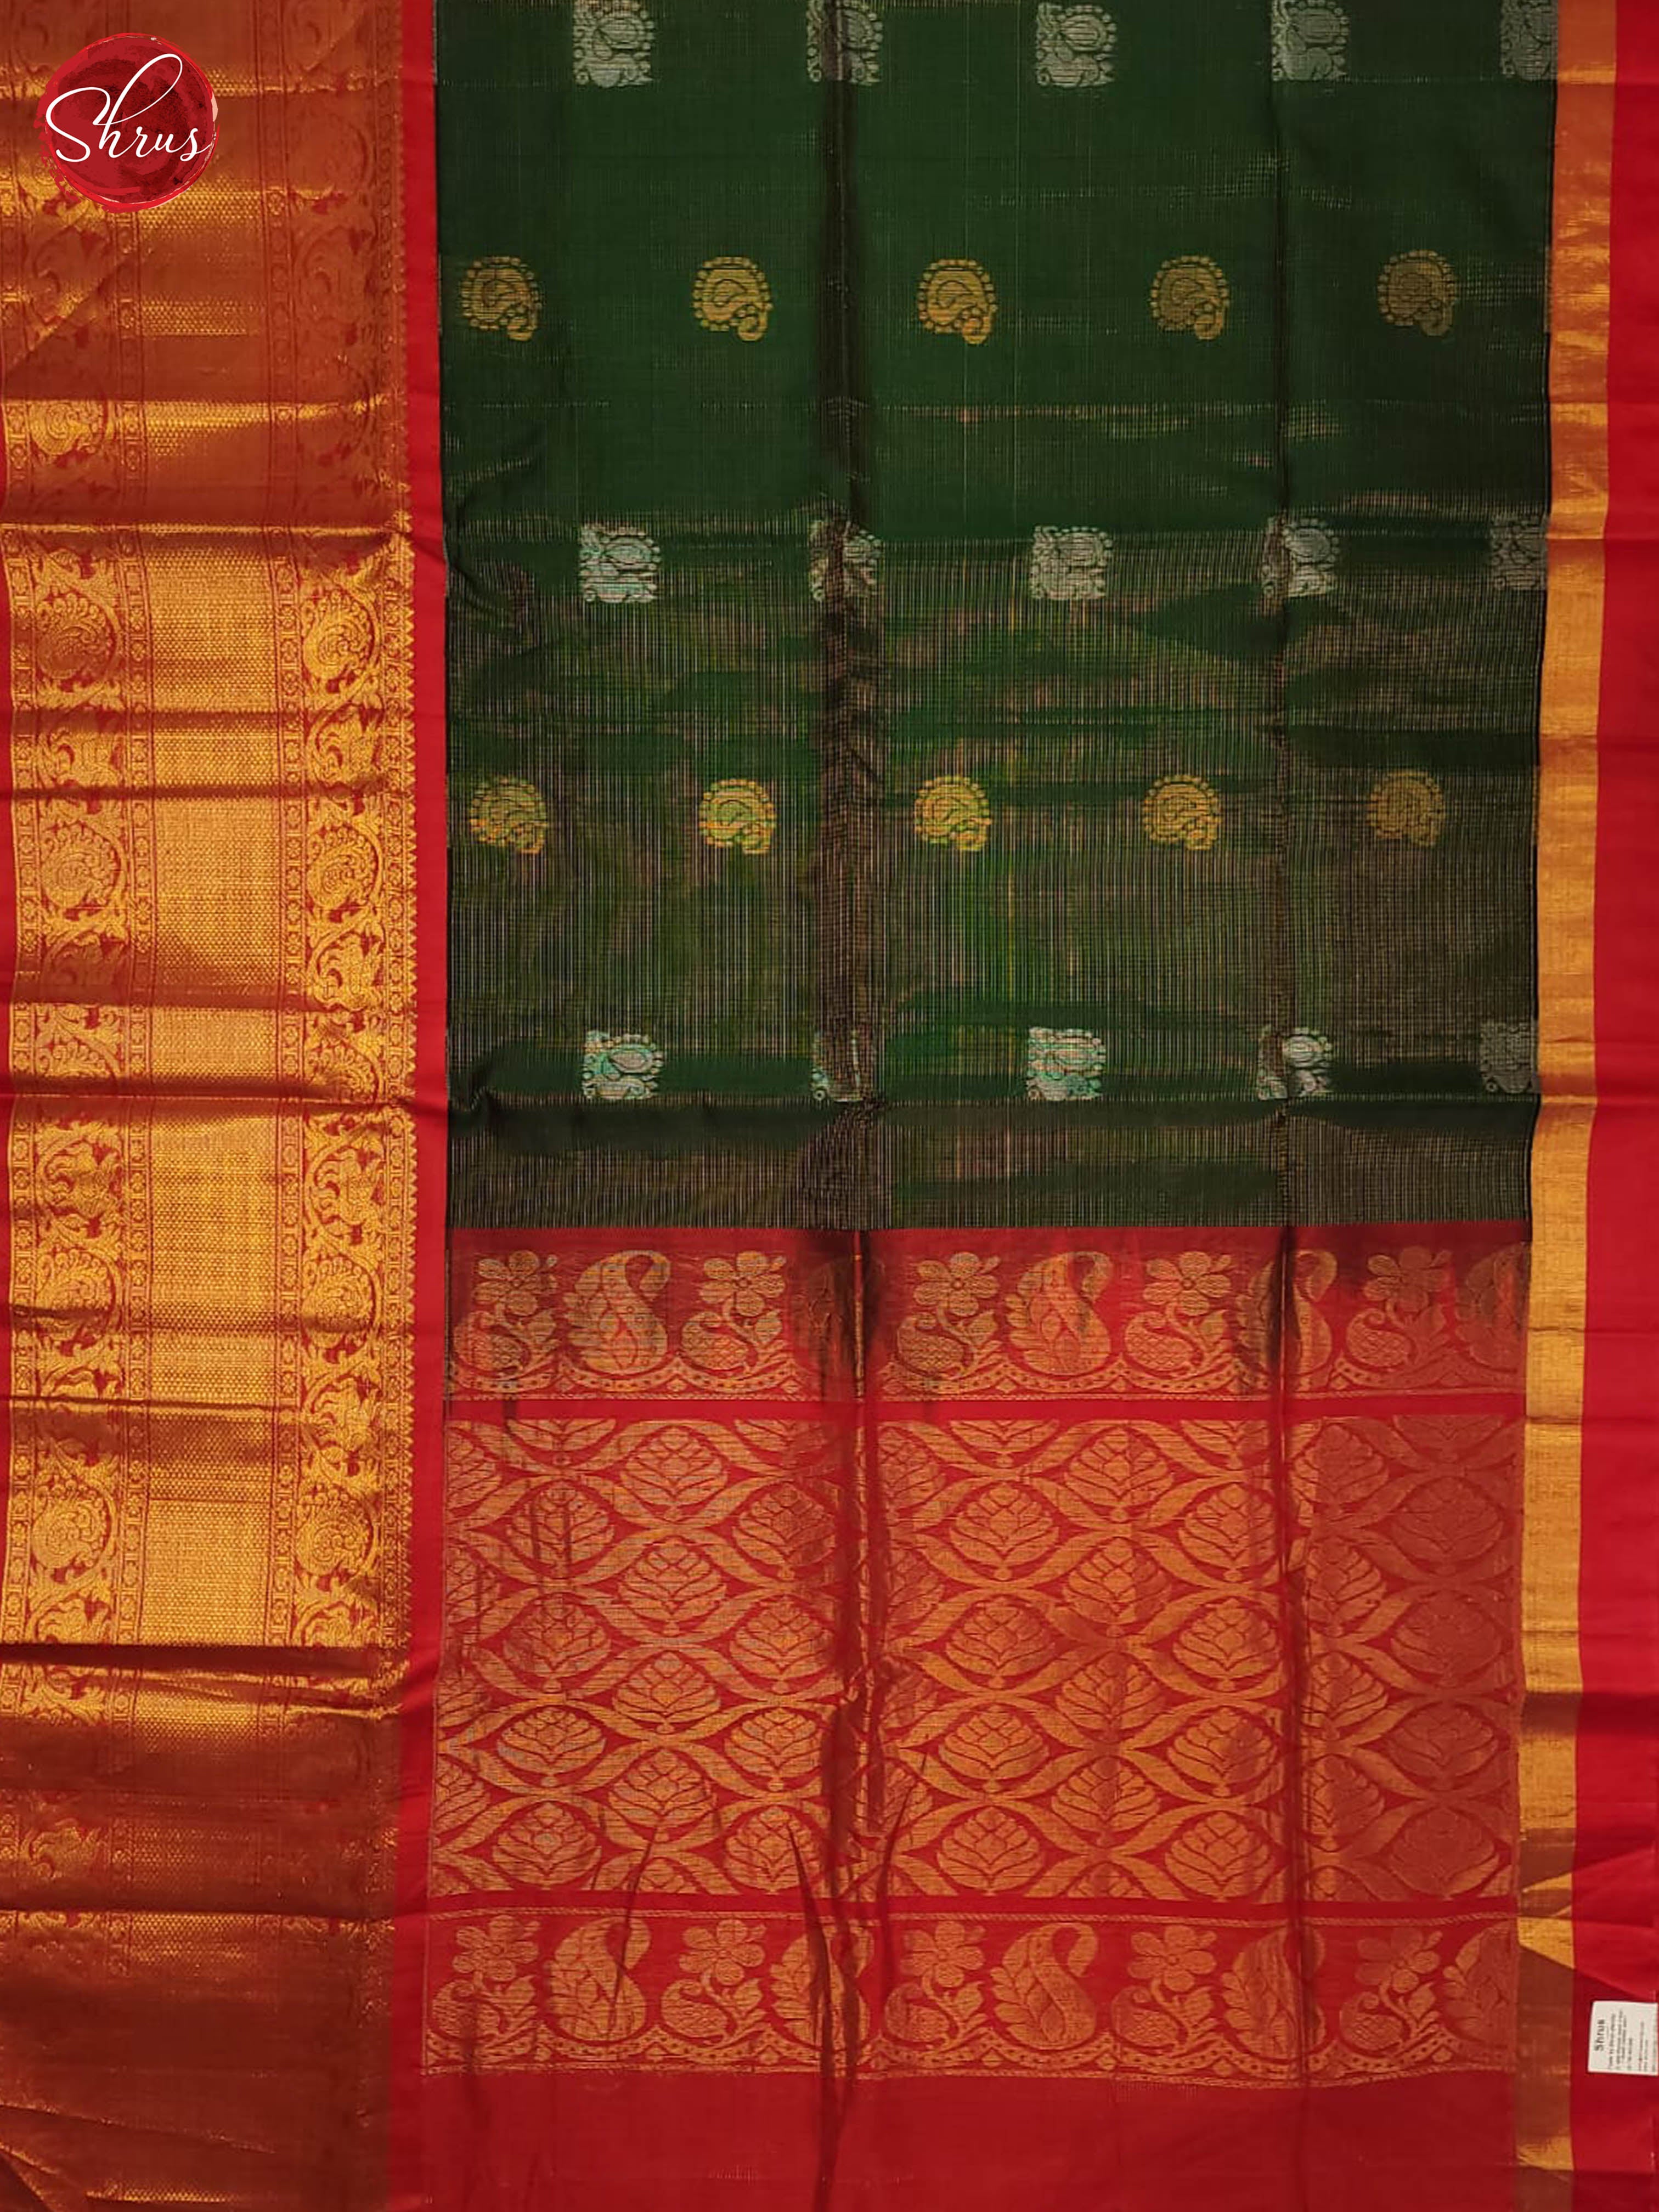 bottle green and Red- Silk Cotton Saree - Shop on ShrusEternity.com